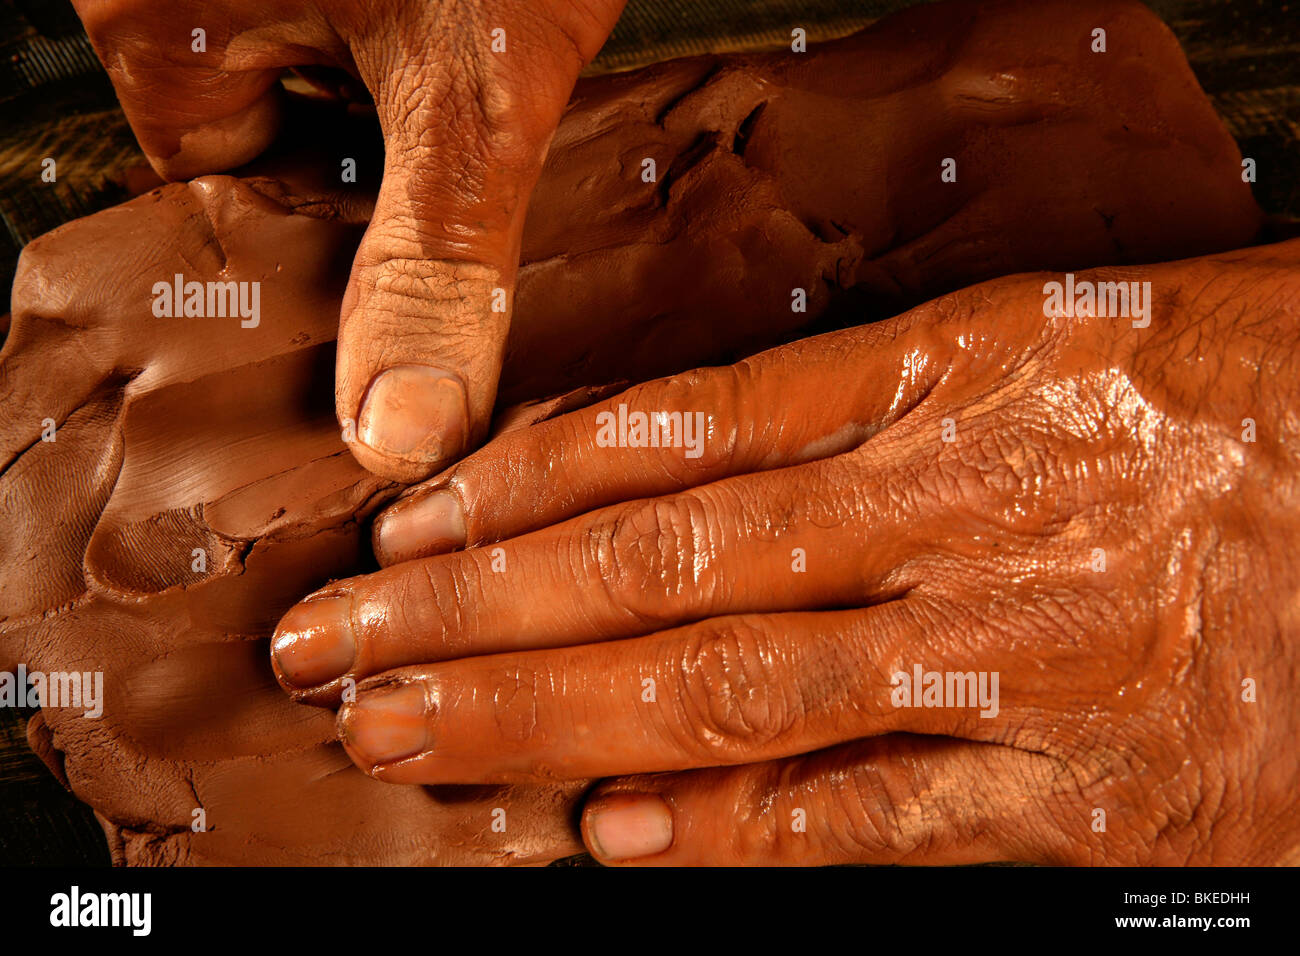 pottery craftsmanship potter craftsman hands working red clay Stock Photo